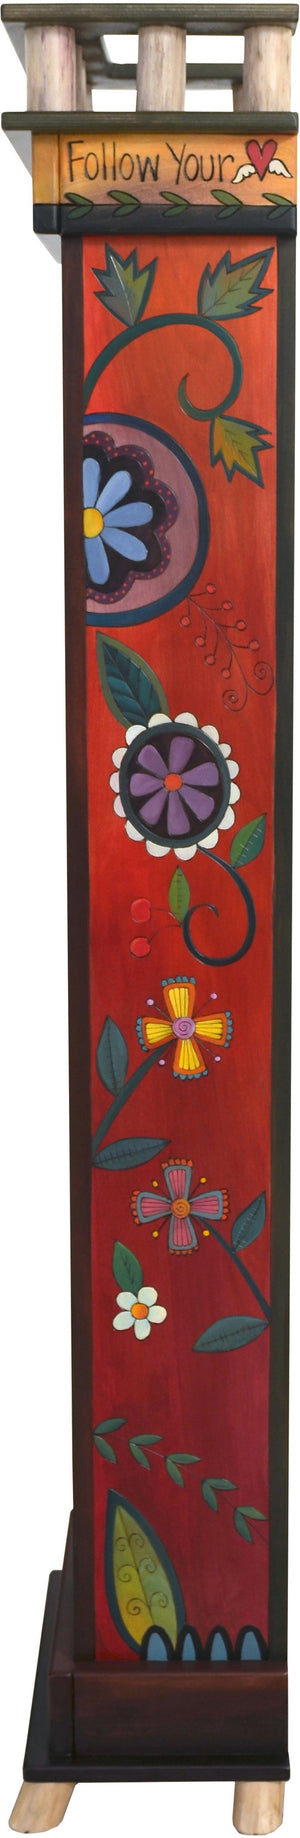 Tall Bookcase –  Lovely and warm bookcase with floral motifs painted in rich hues